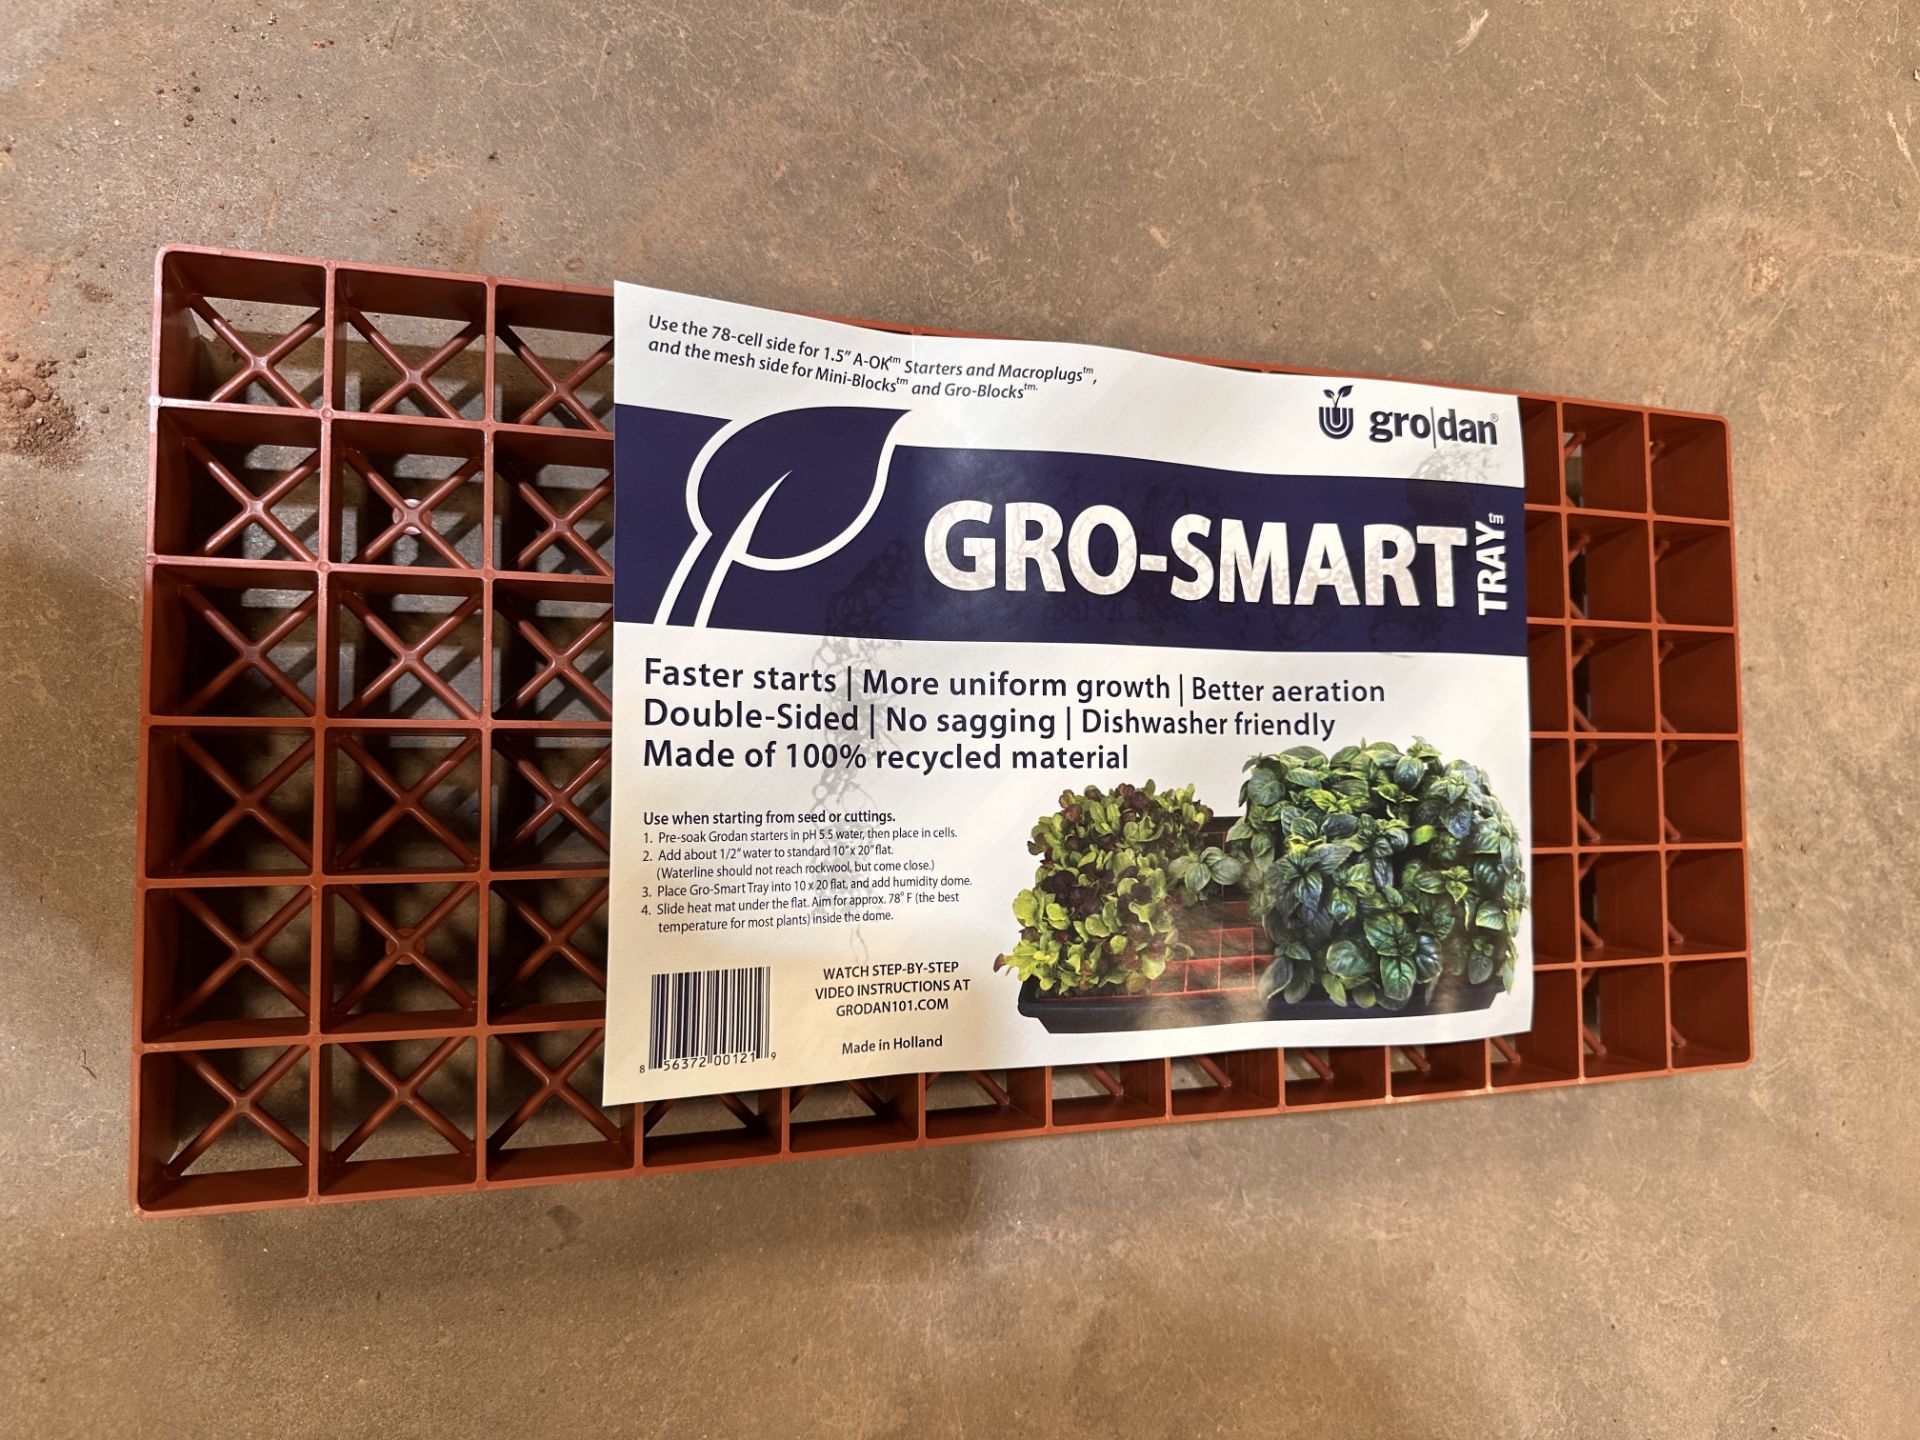 (Located in Snowflake, AZ) Grodan Gro-Smart Trays, 78 Cell Slide for 1.5" Starters, Qty 1 Pallet - Image 2 of 3